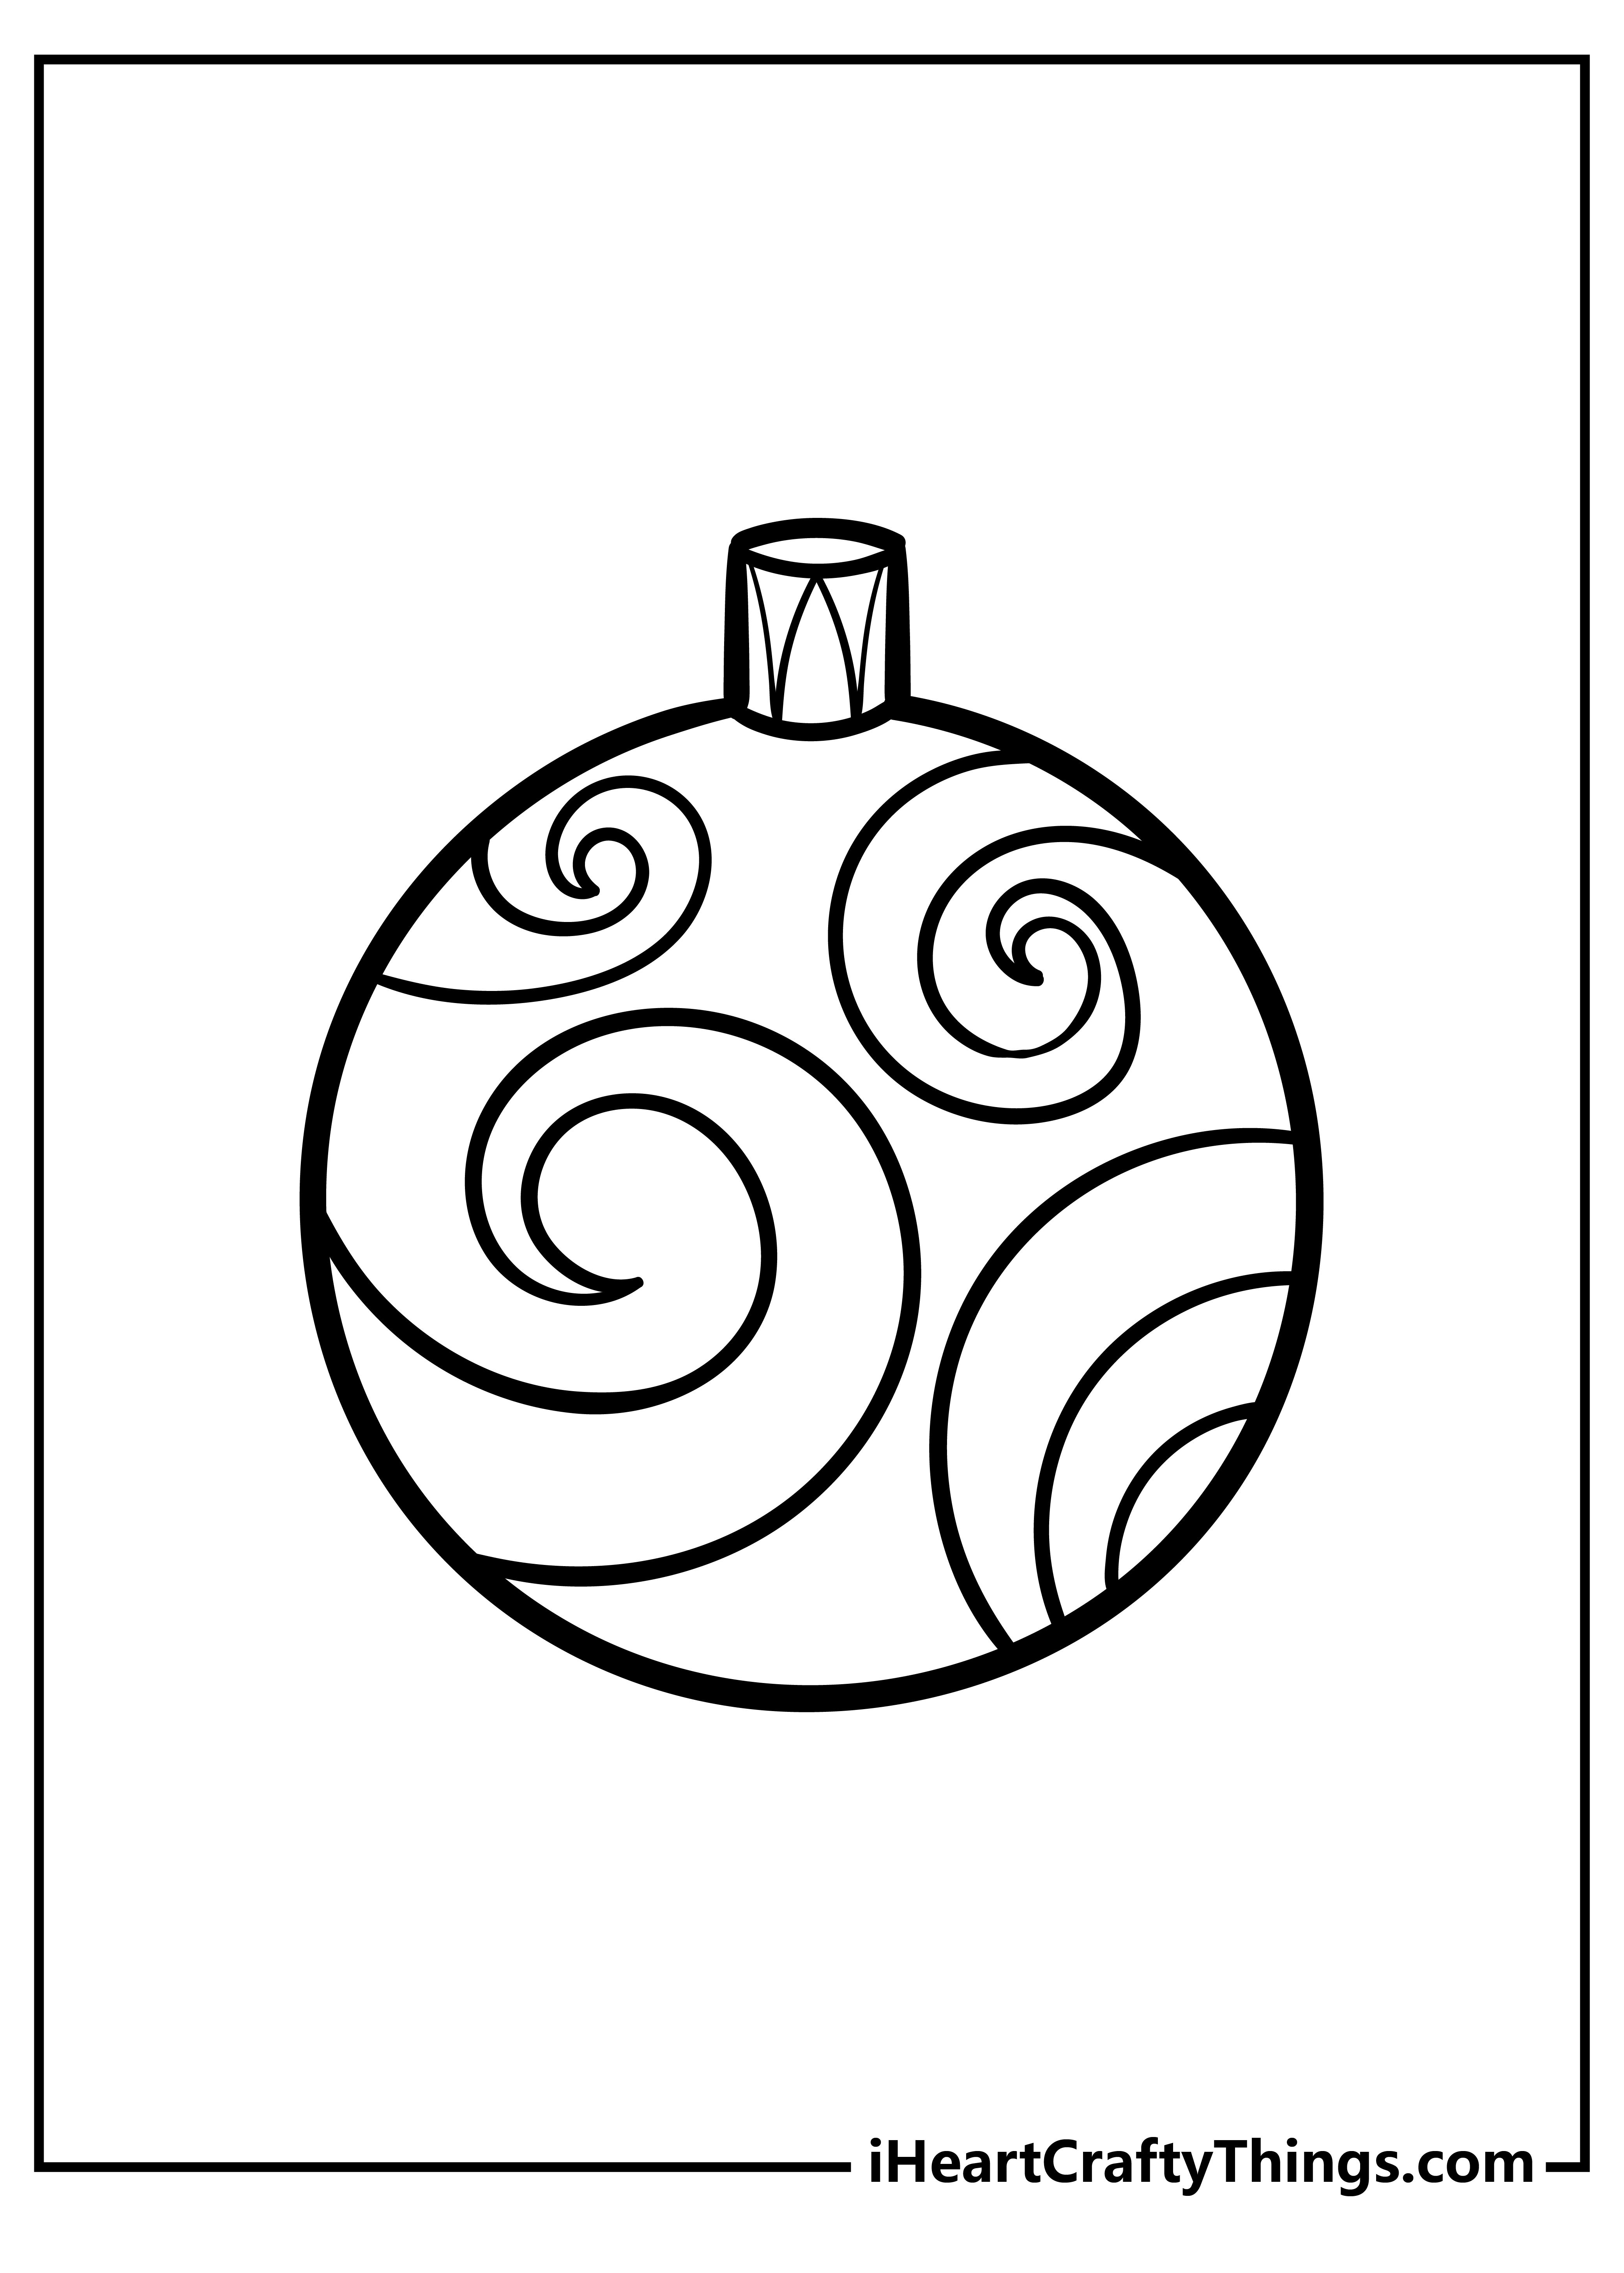 Christmas Ornament Coloring Sheet for children free download